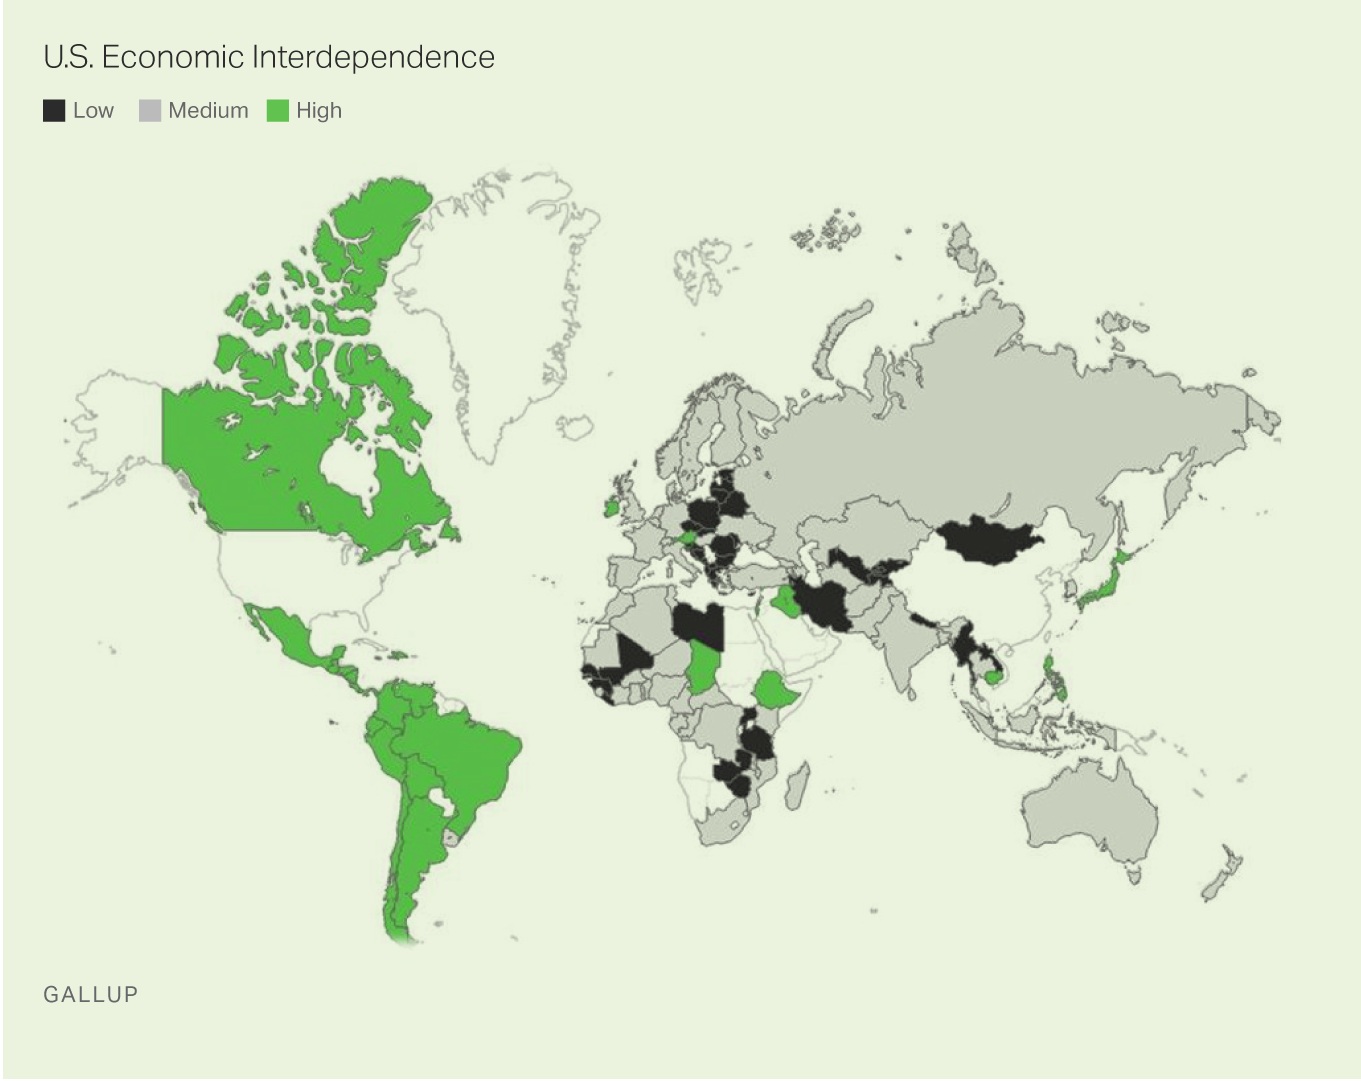 Map of Nations by Degree of U.S. Economic Interdependence